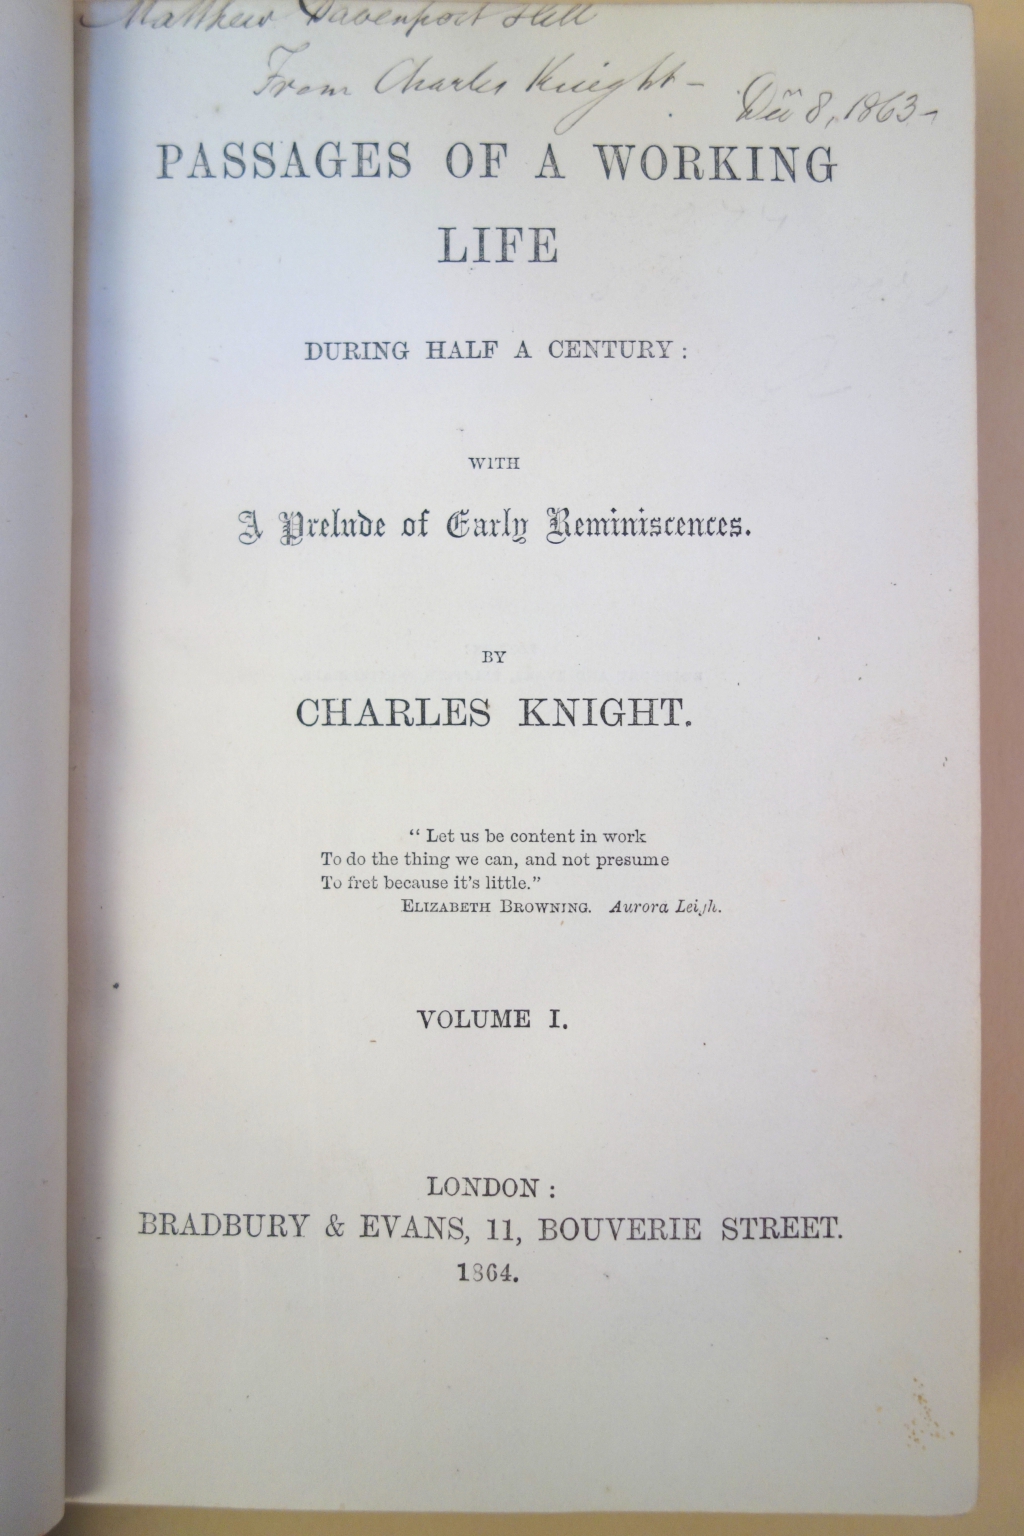 The book was dated 1864 but Knight clearly had copies in early December 1863, based on the date of his inscription to Matthew Davenport Hill.